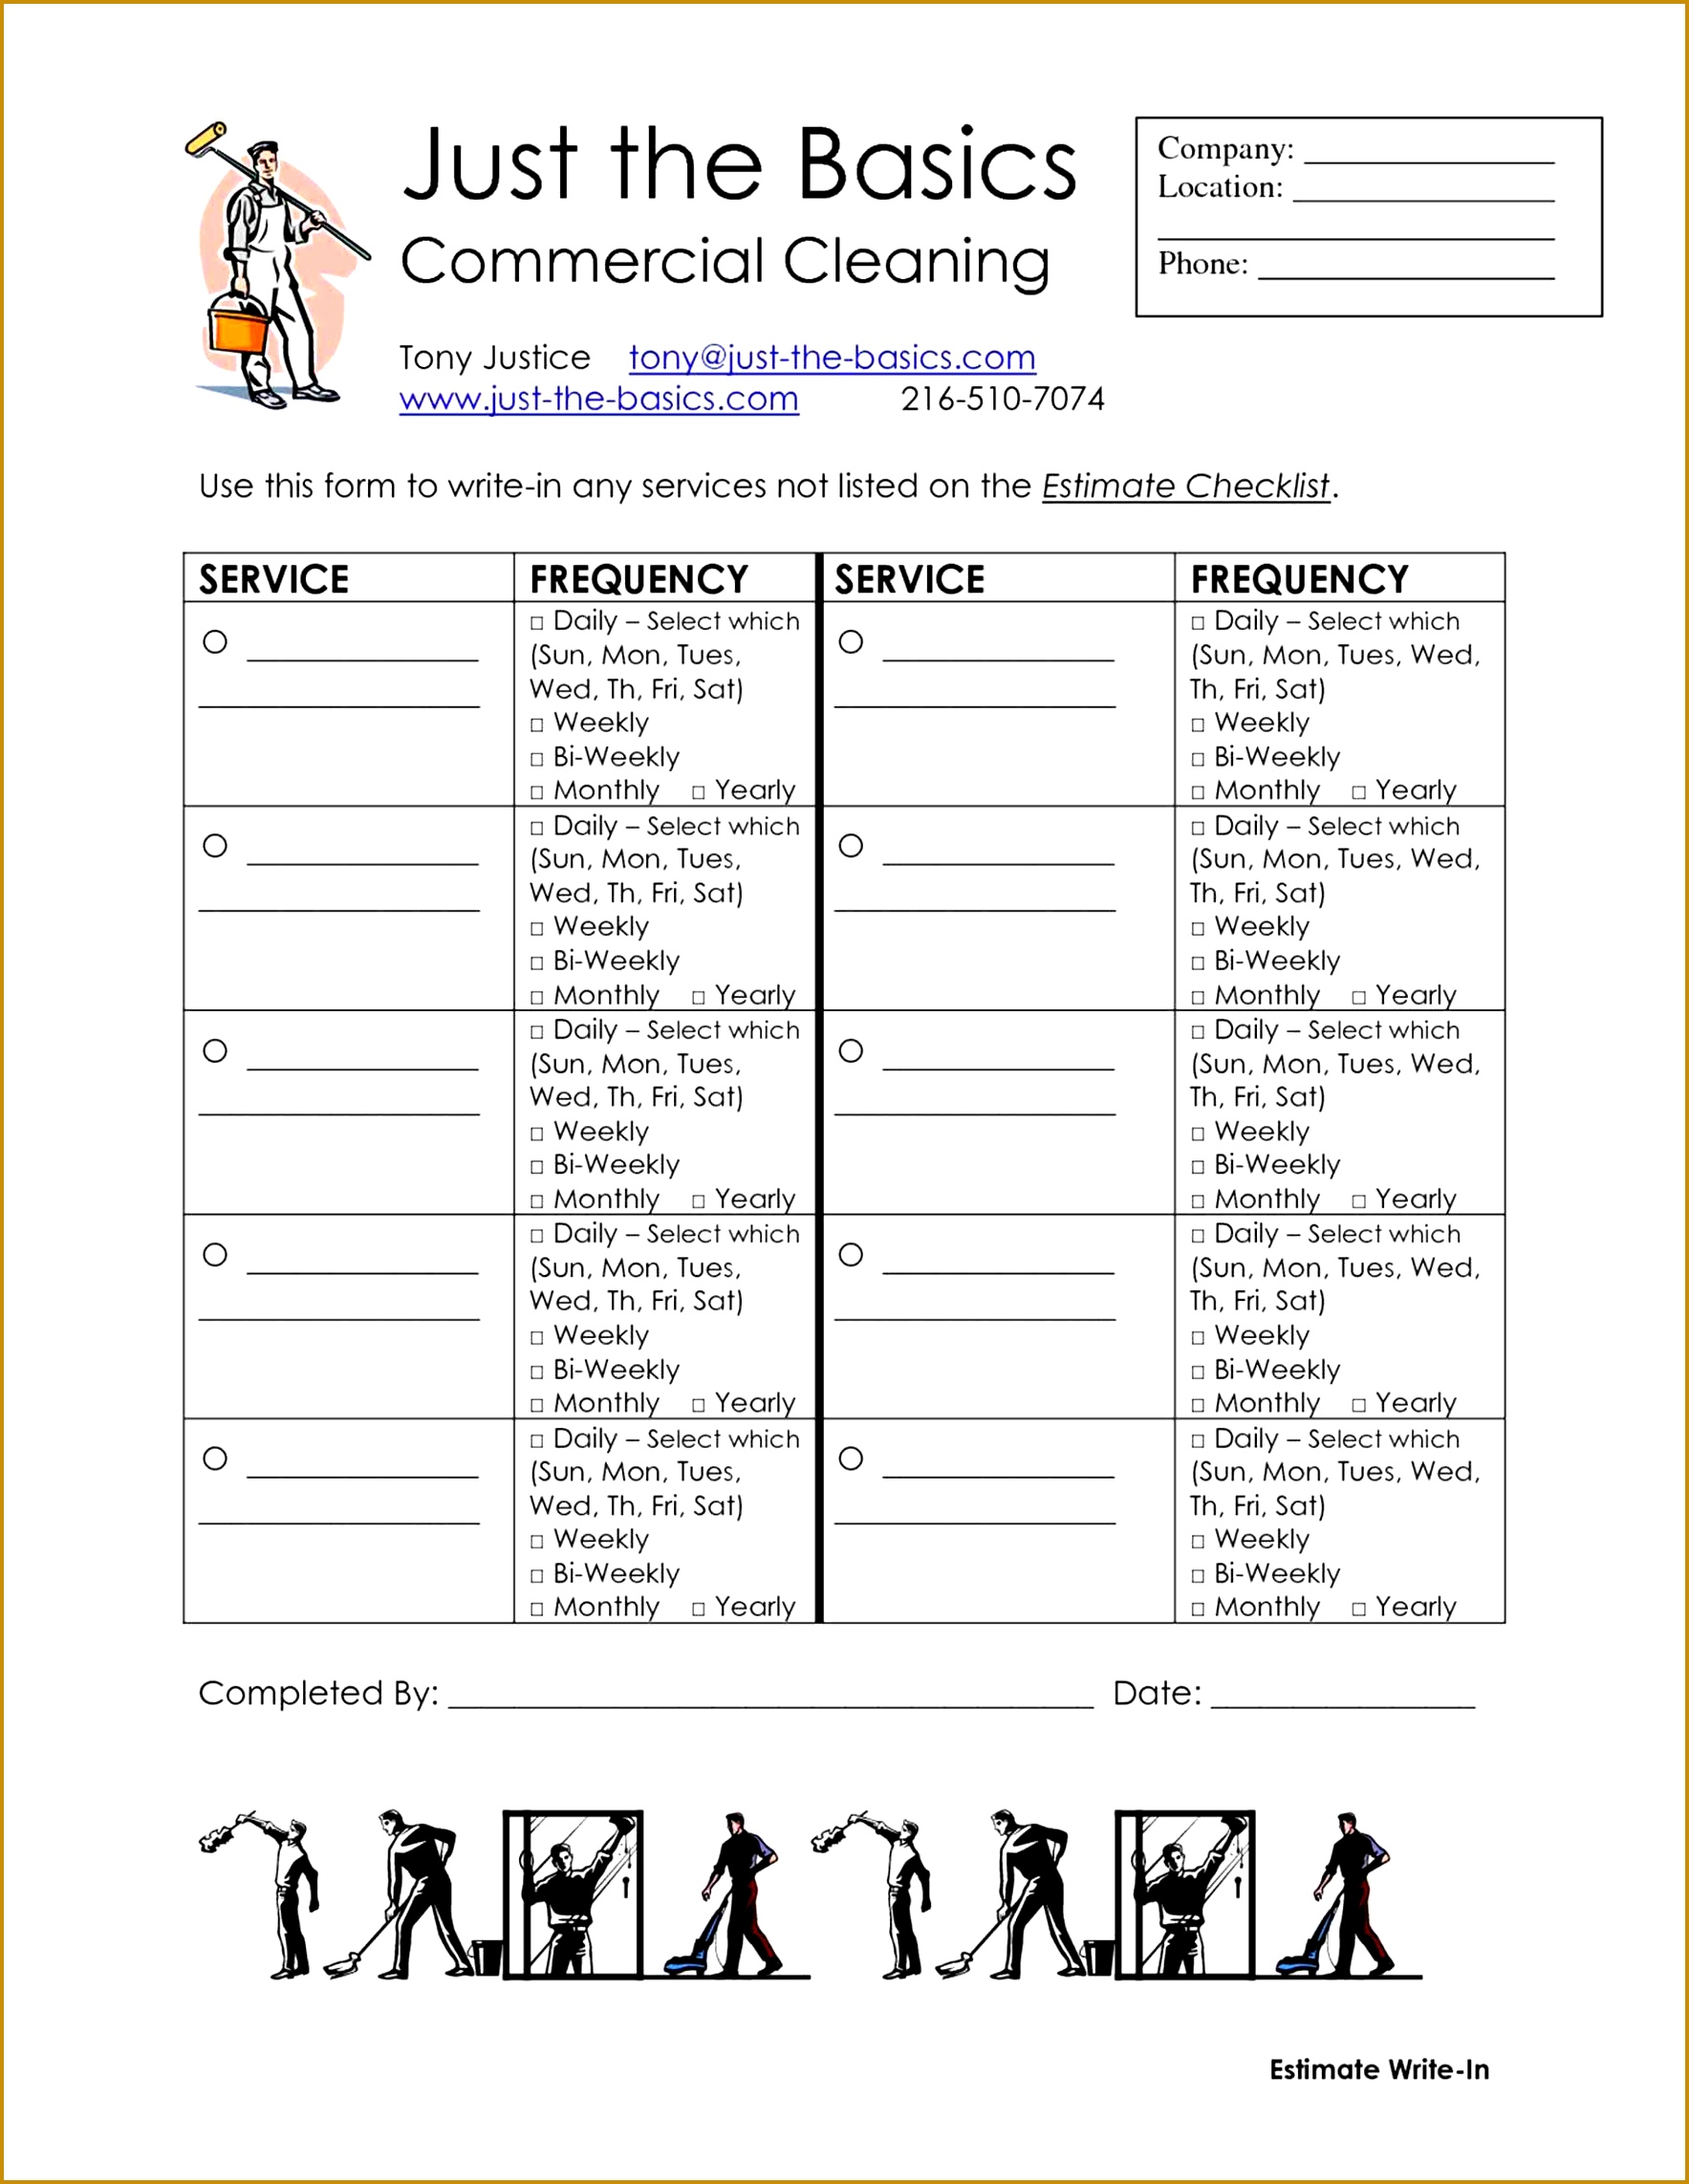 office Cleaning Service Checklist Template cleaning list checklist janitorial supplies hotel room templates external house hotel 17672285